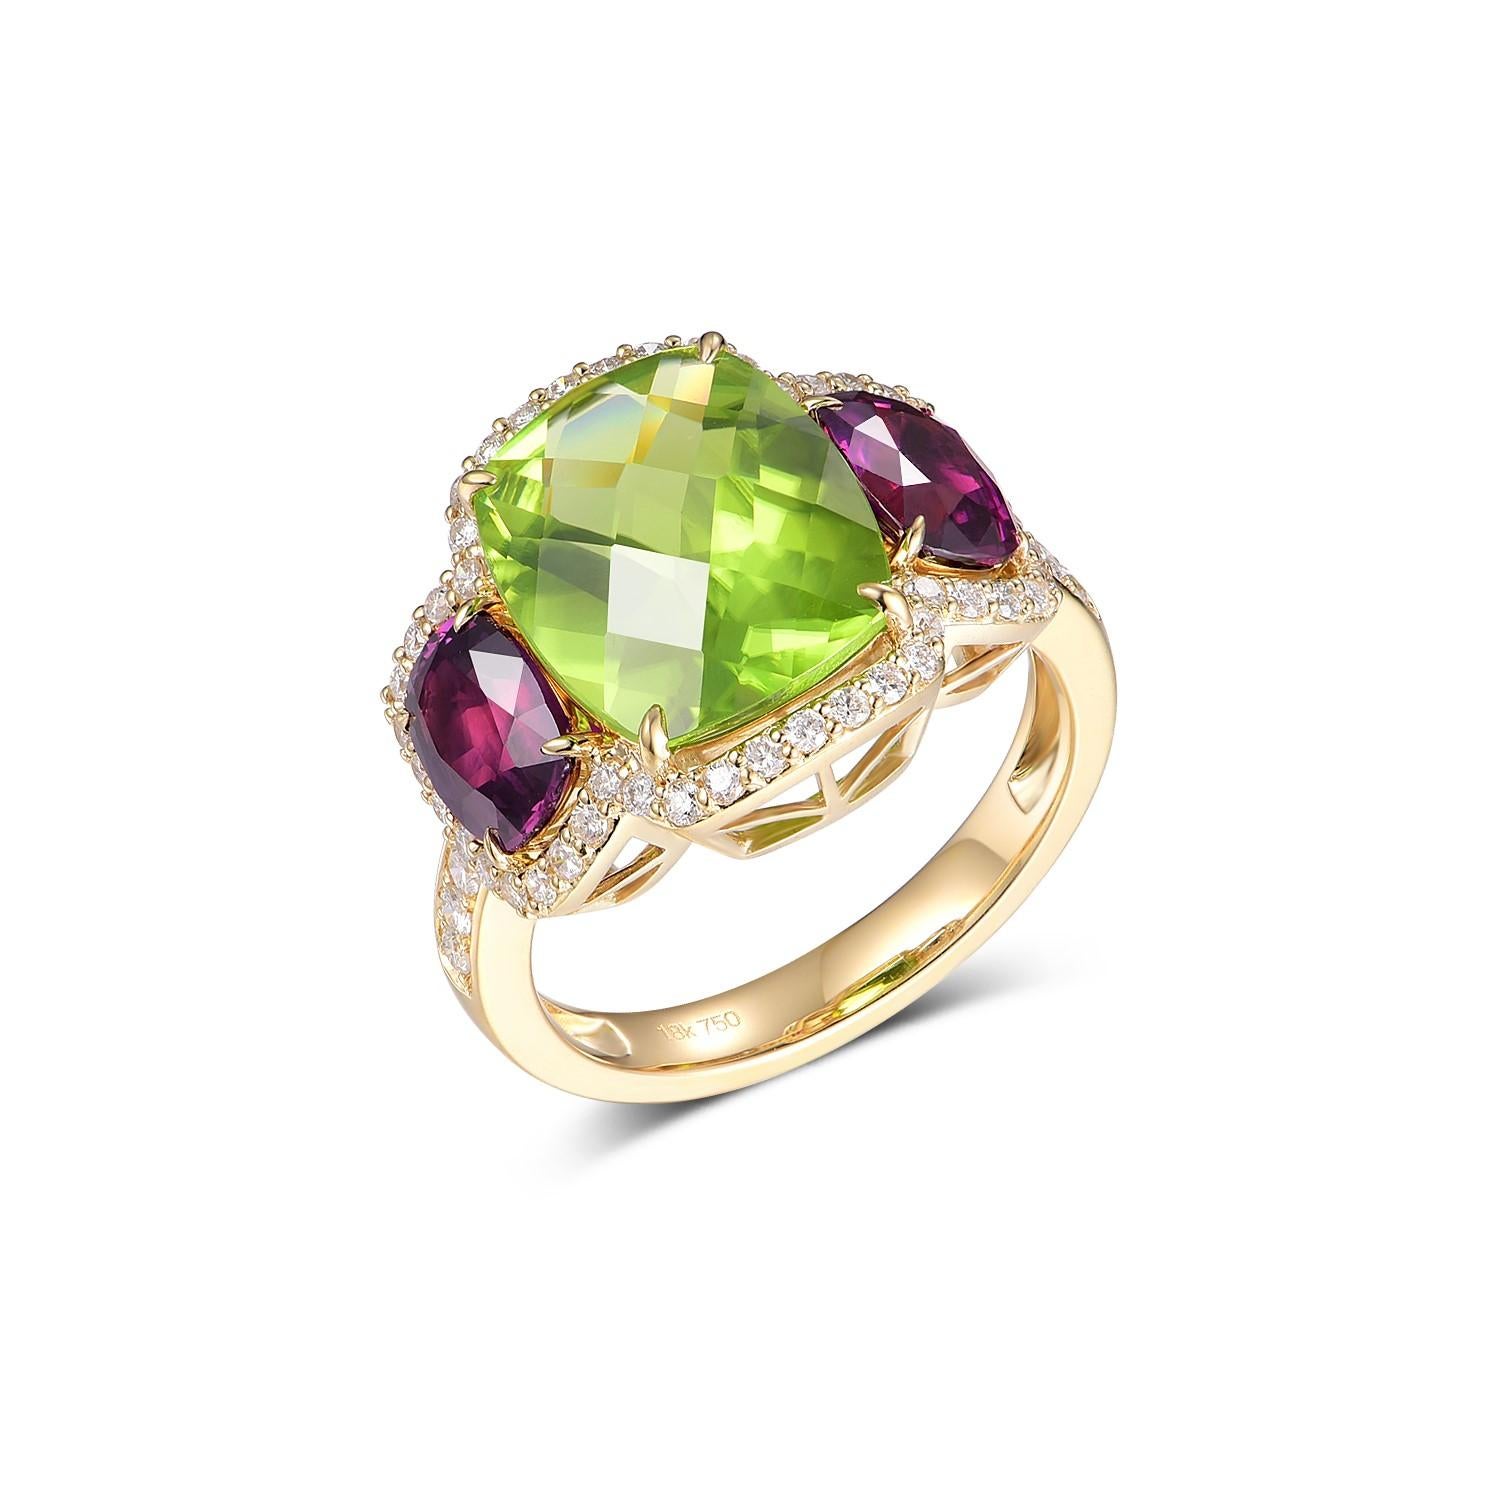 An enchanting piece of fine jewelry, this ring seamlessly melds timeless design with a burst of vibrant hues. Set in luxurious 18K yellow gold, the main attraction is a resplendent rectangle facet-cut peridot, weighing in at a substantial 5.41